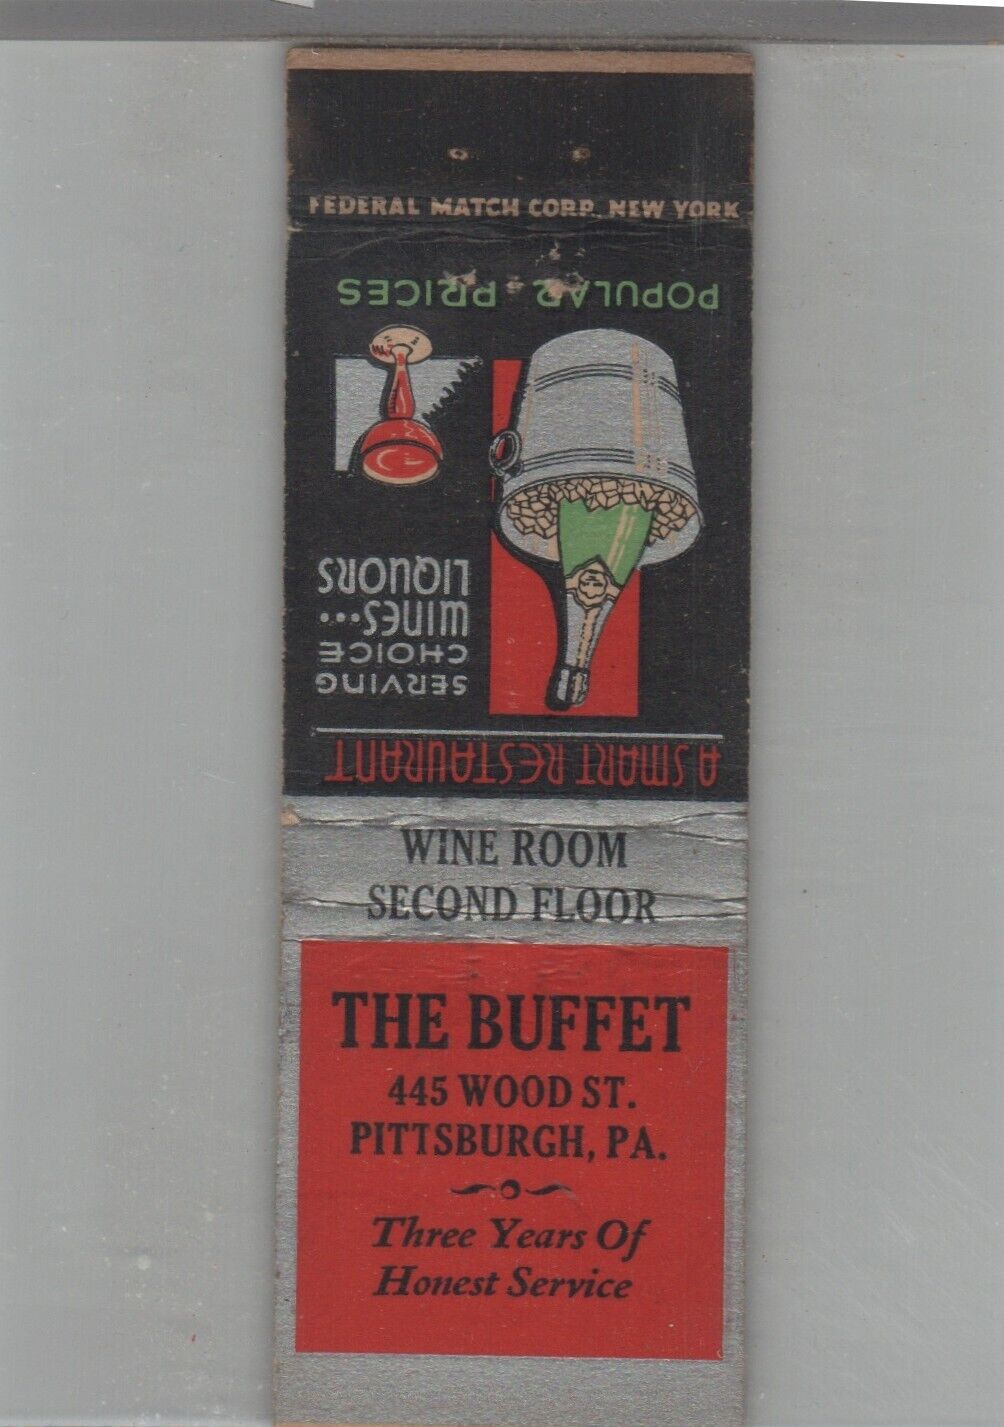 Matchbook Cover 1920s-30's Federal Match The Buffet Pittsburgh, PA